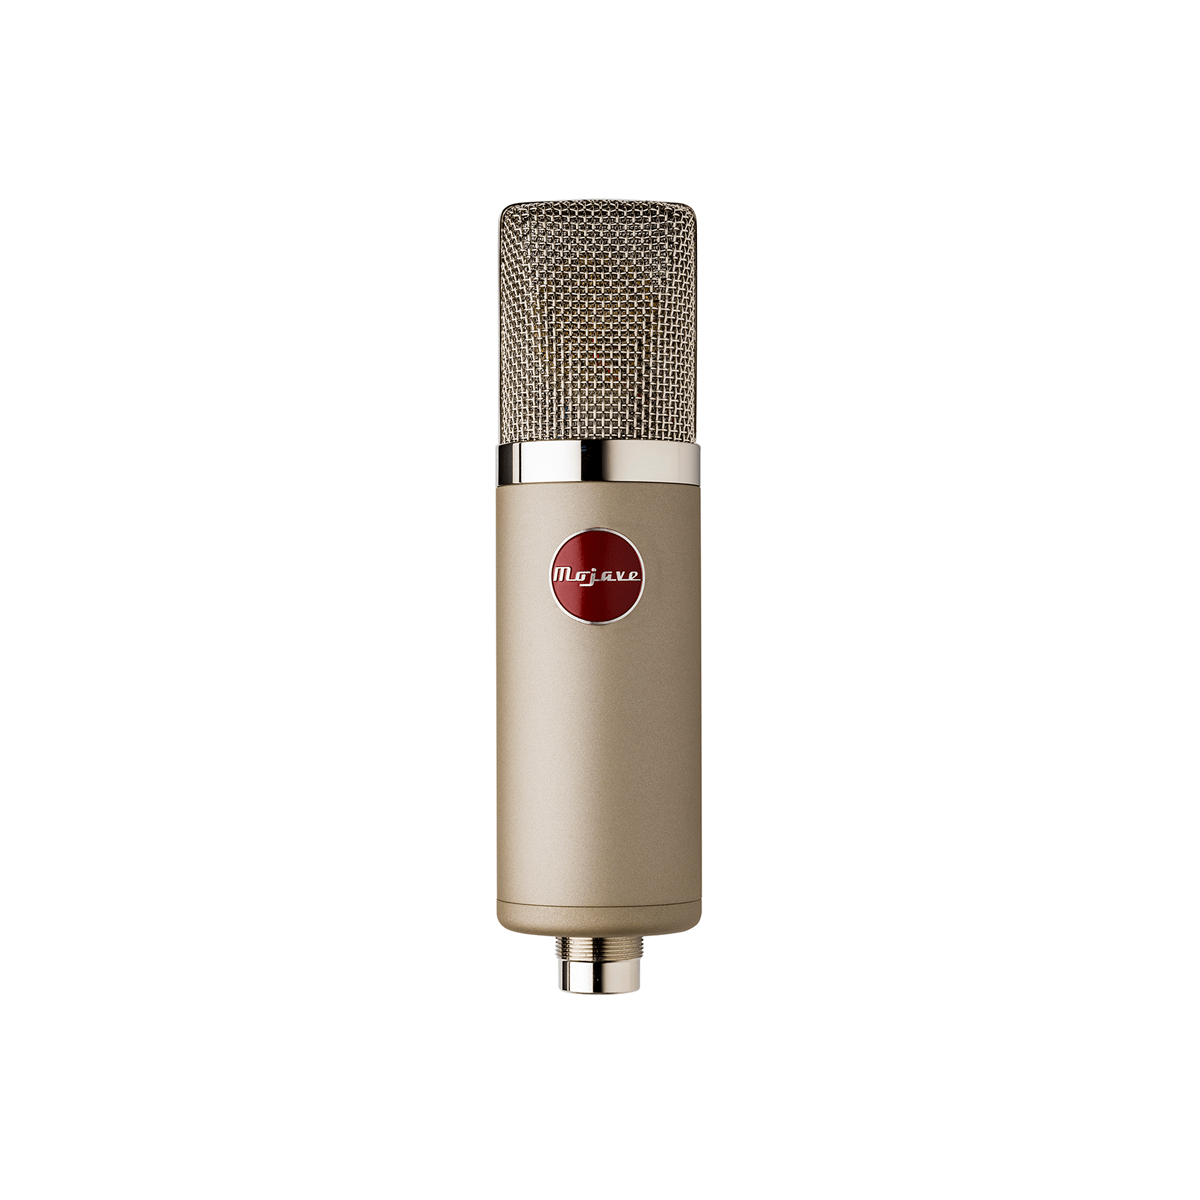 MOHAVE AUDIO Home Page MOHAVE AUDIO MA-300 SATIN NICKEL TUBE CONDENSER MIC - Byron Music